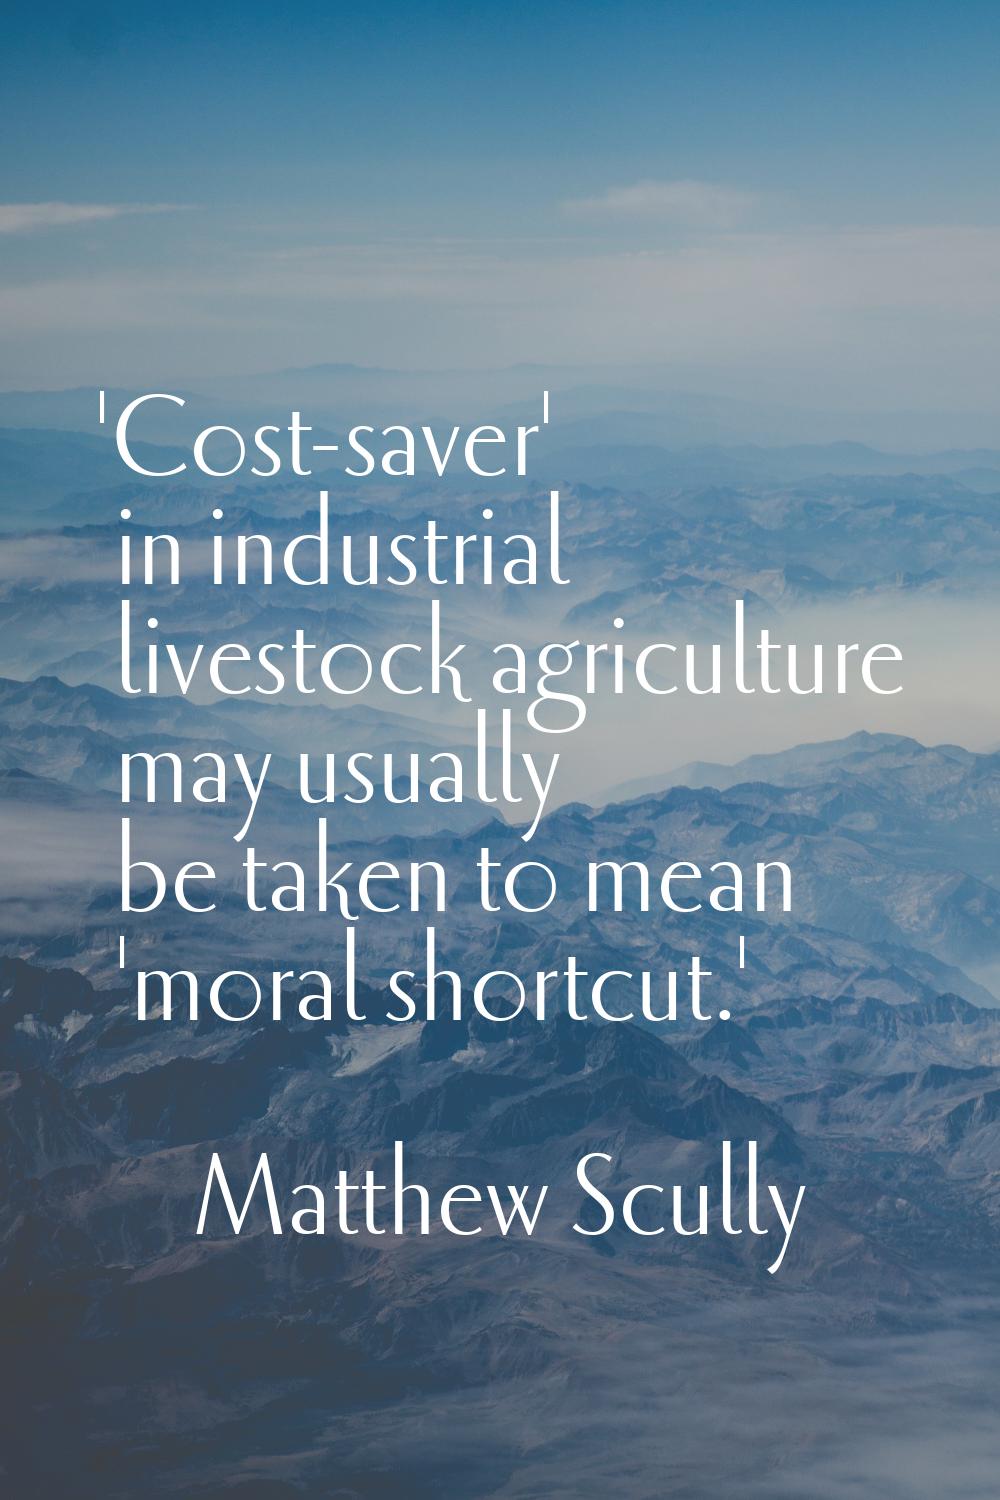 'Cost-saver' in industrial livestock agriculture may usually be taken to mean 'moral shortcut.'